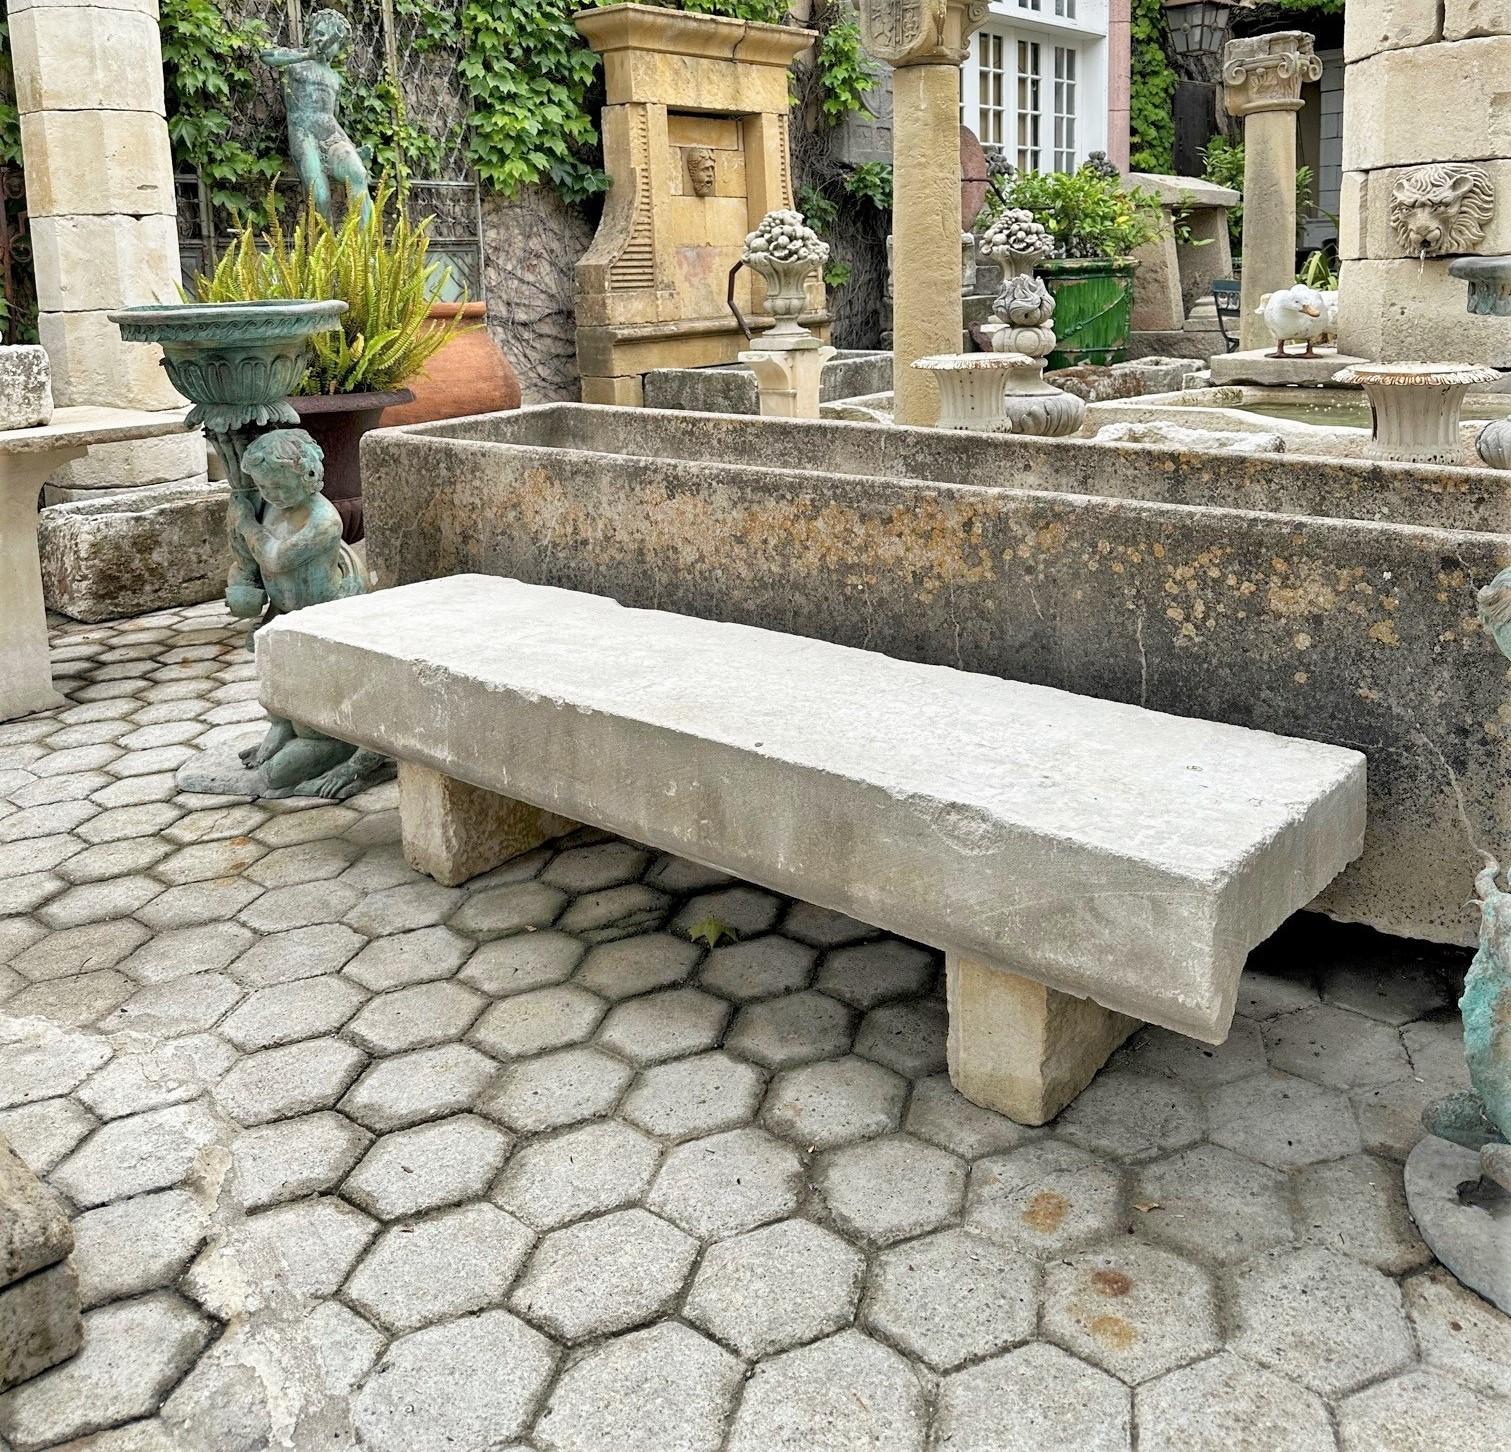 Hand Carved Stone Rustic Park Garden Bench Seat Antique Indoor Outdoor Landscape . imposing and Very long late 19th / 20th century carved elements garden Stone bench. This rustic beauty is a great seating bench due to the unusual width and length.